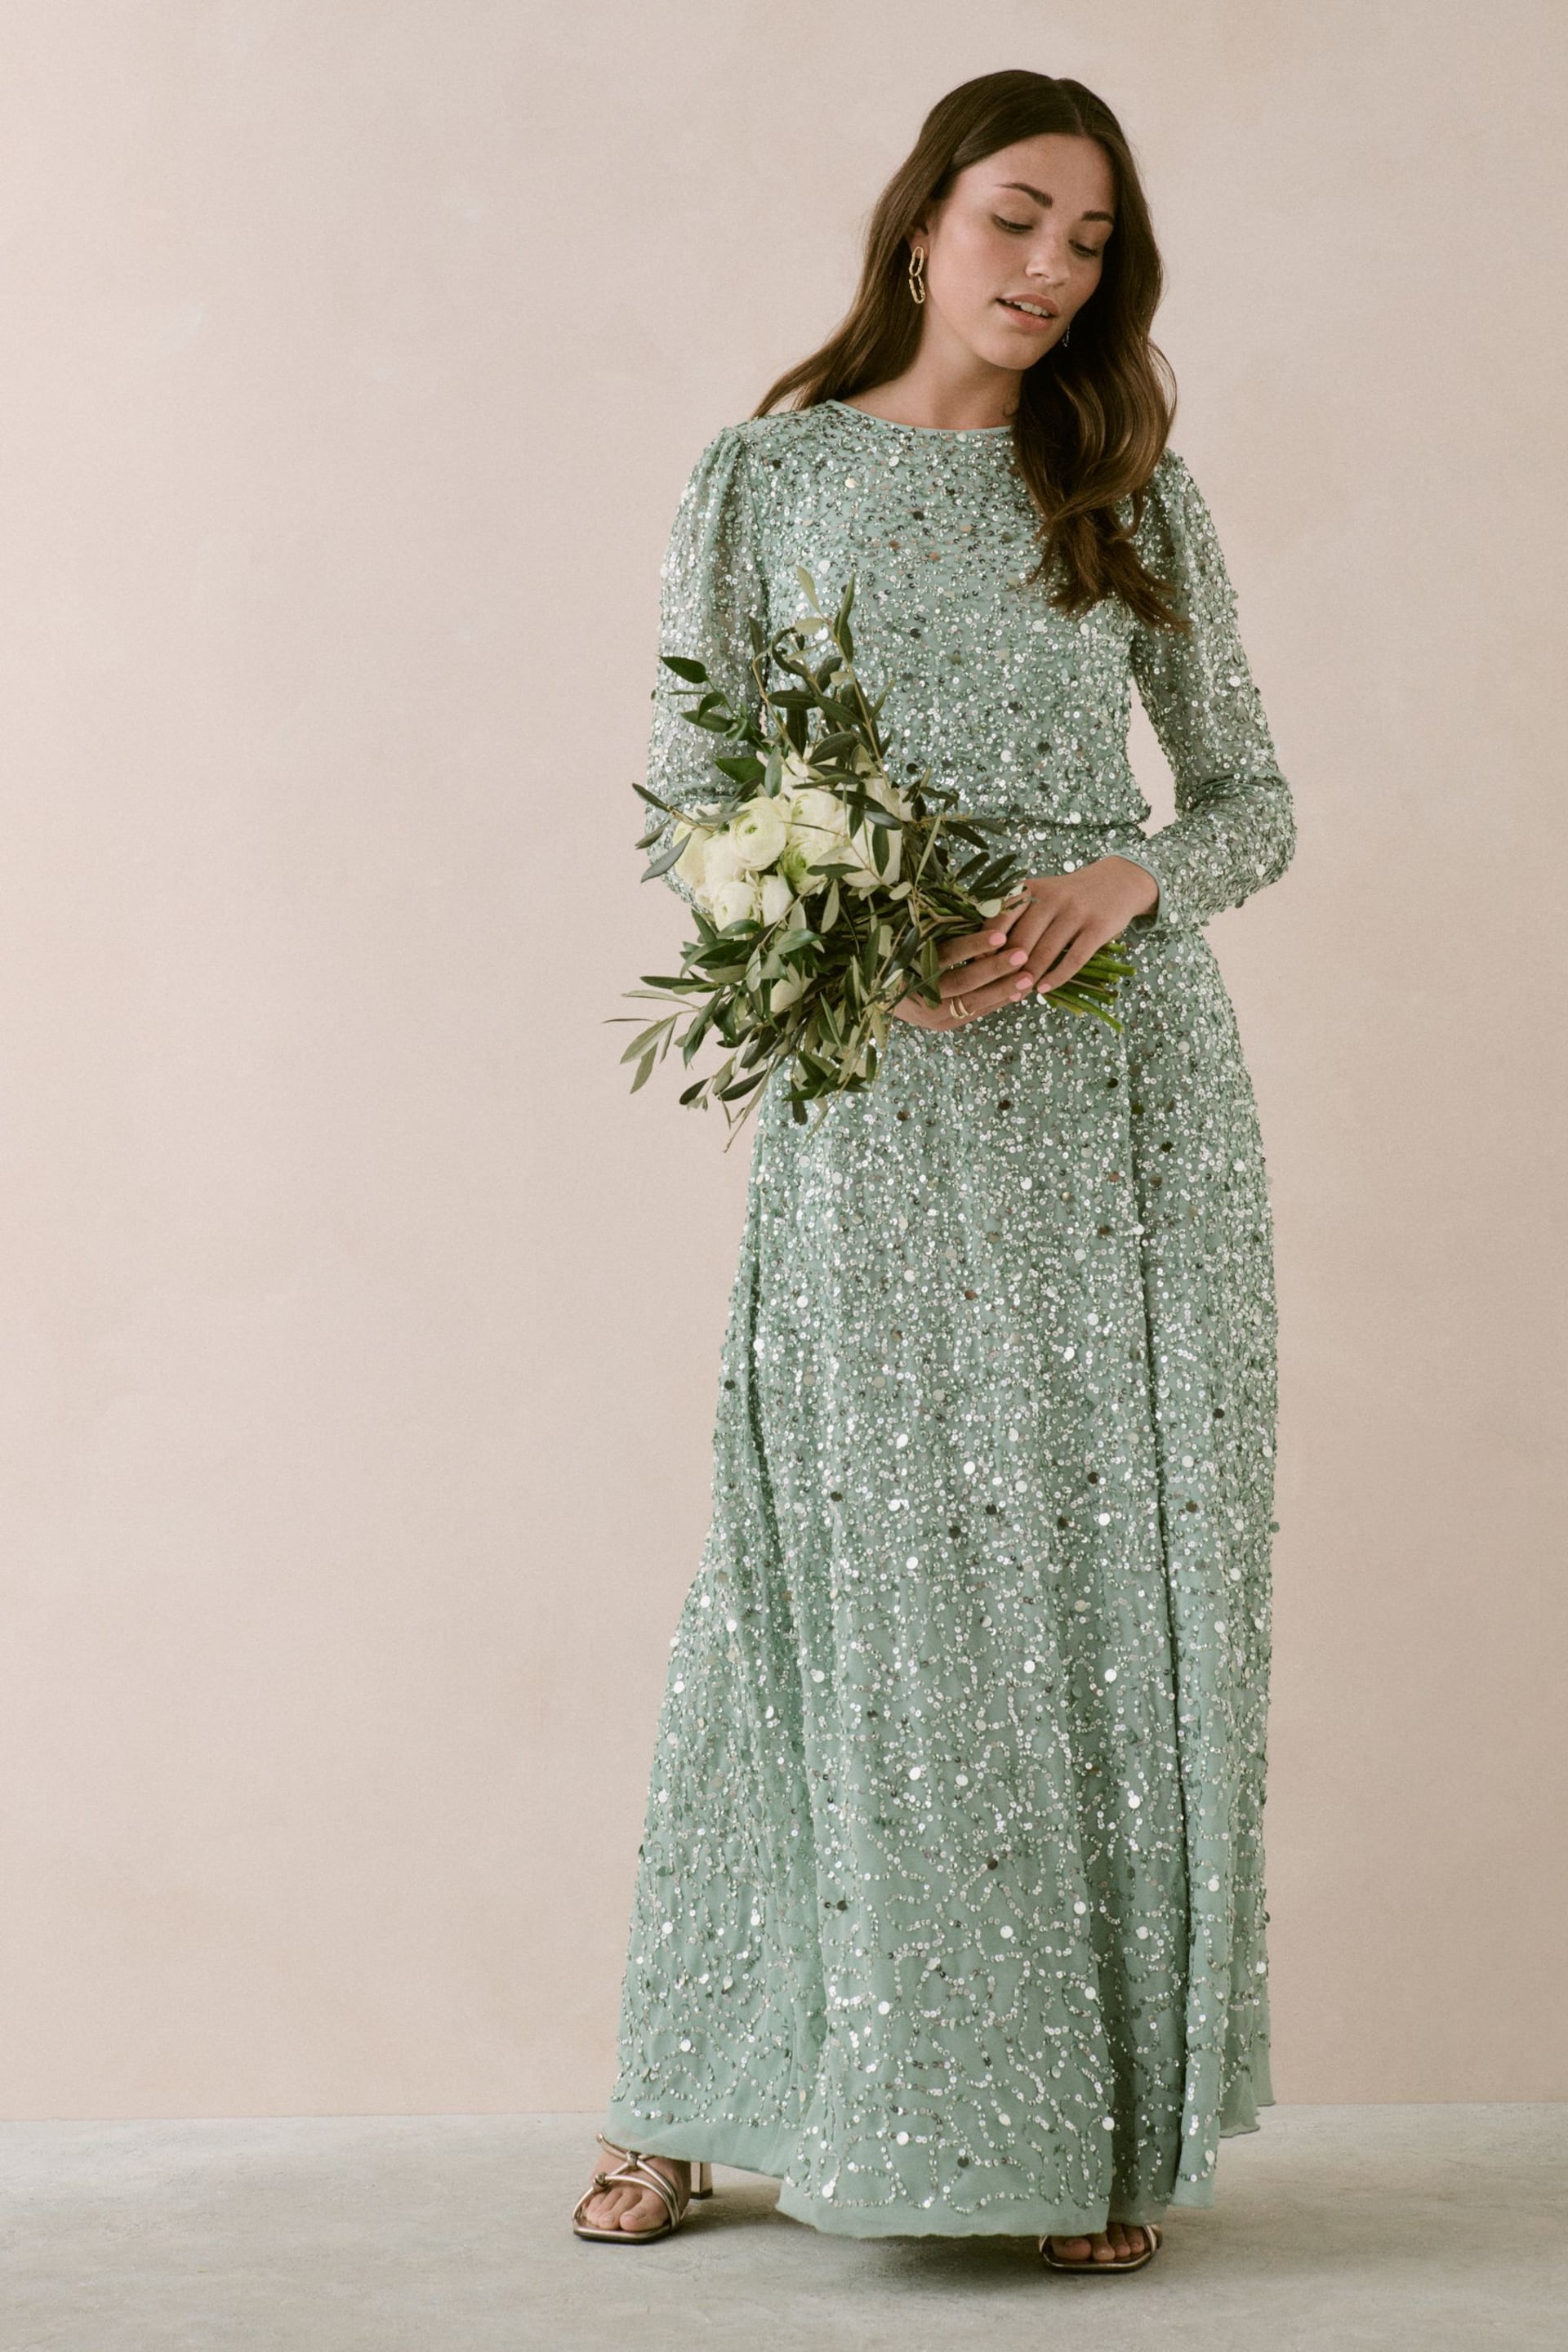 Maya Green All Over Embellished Long Sleeve Modest Maxi Dress - Image 1 of 4